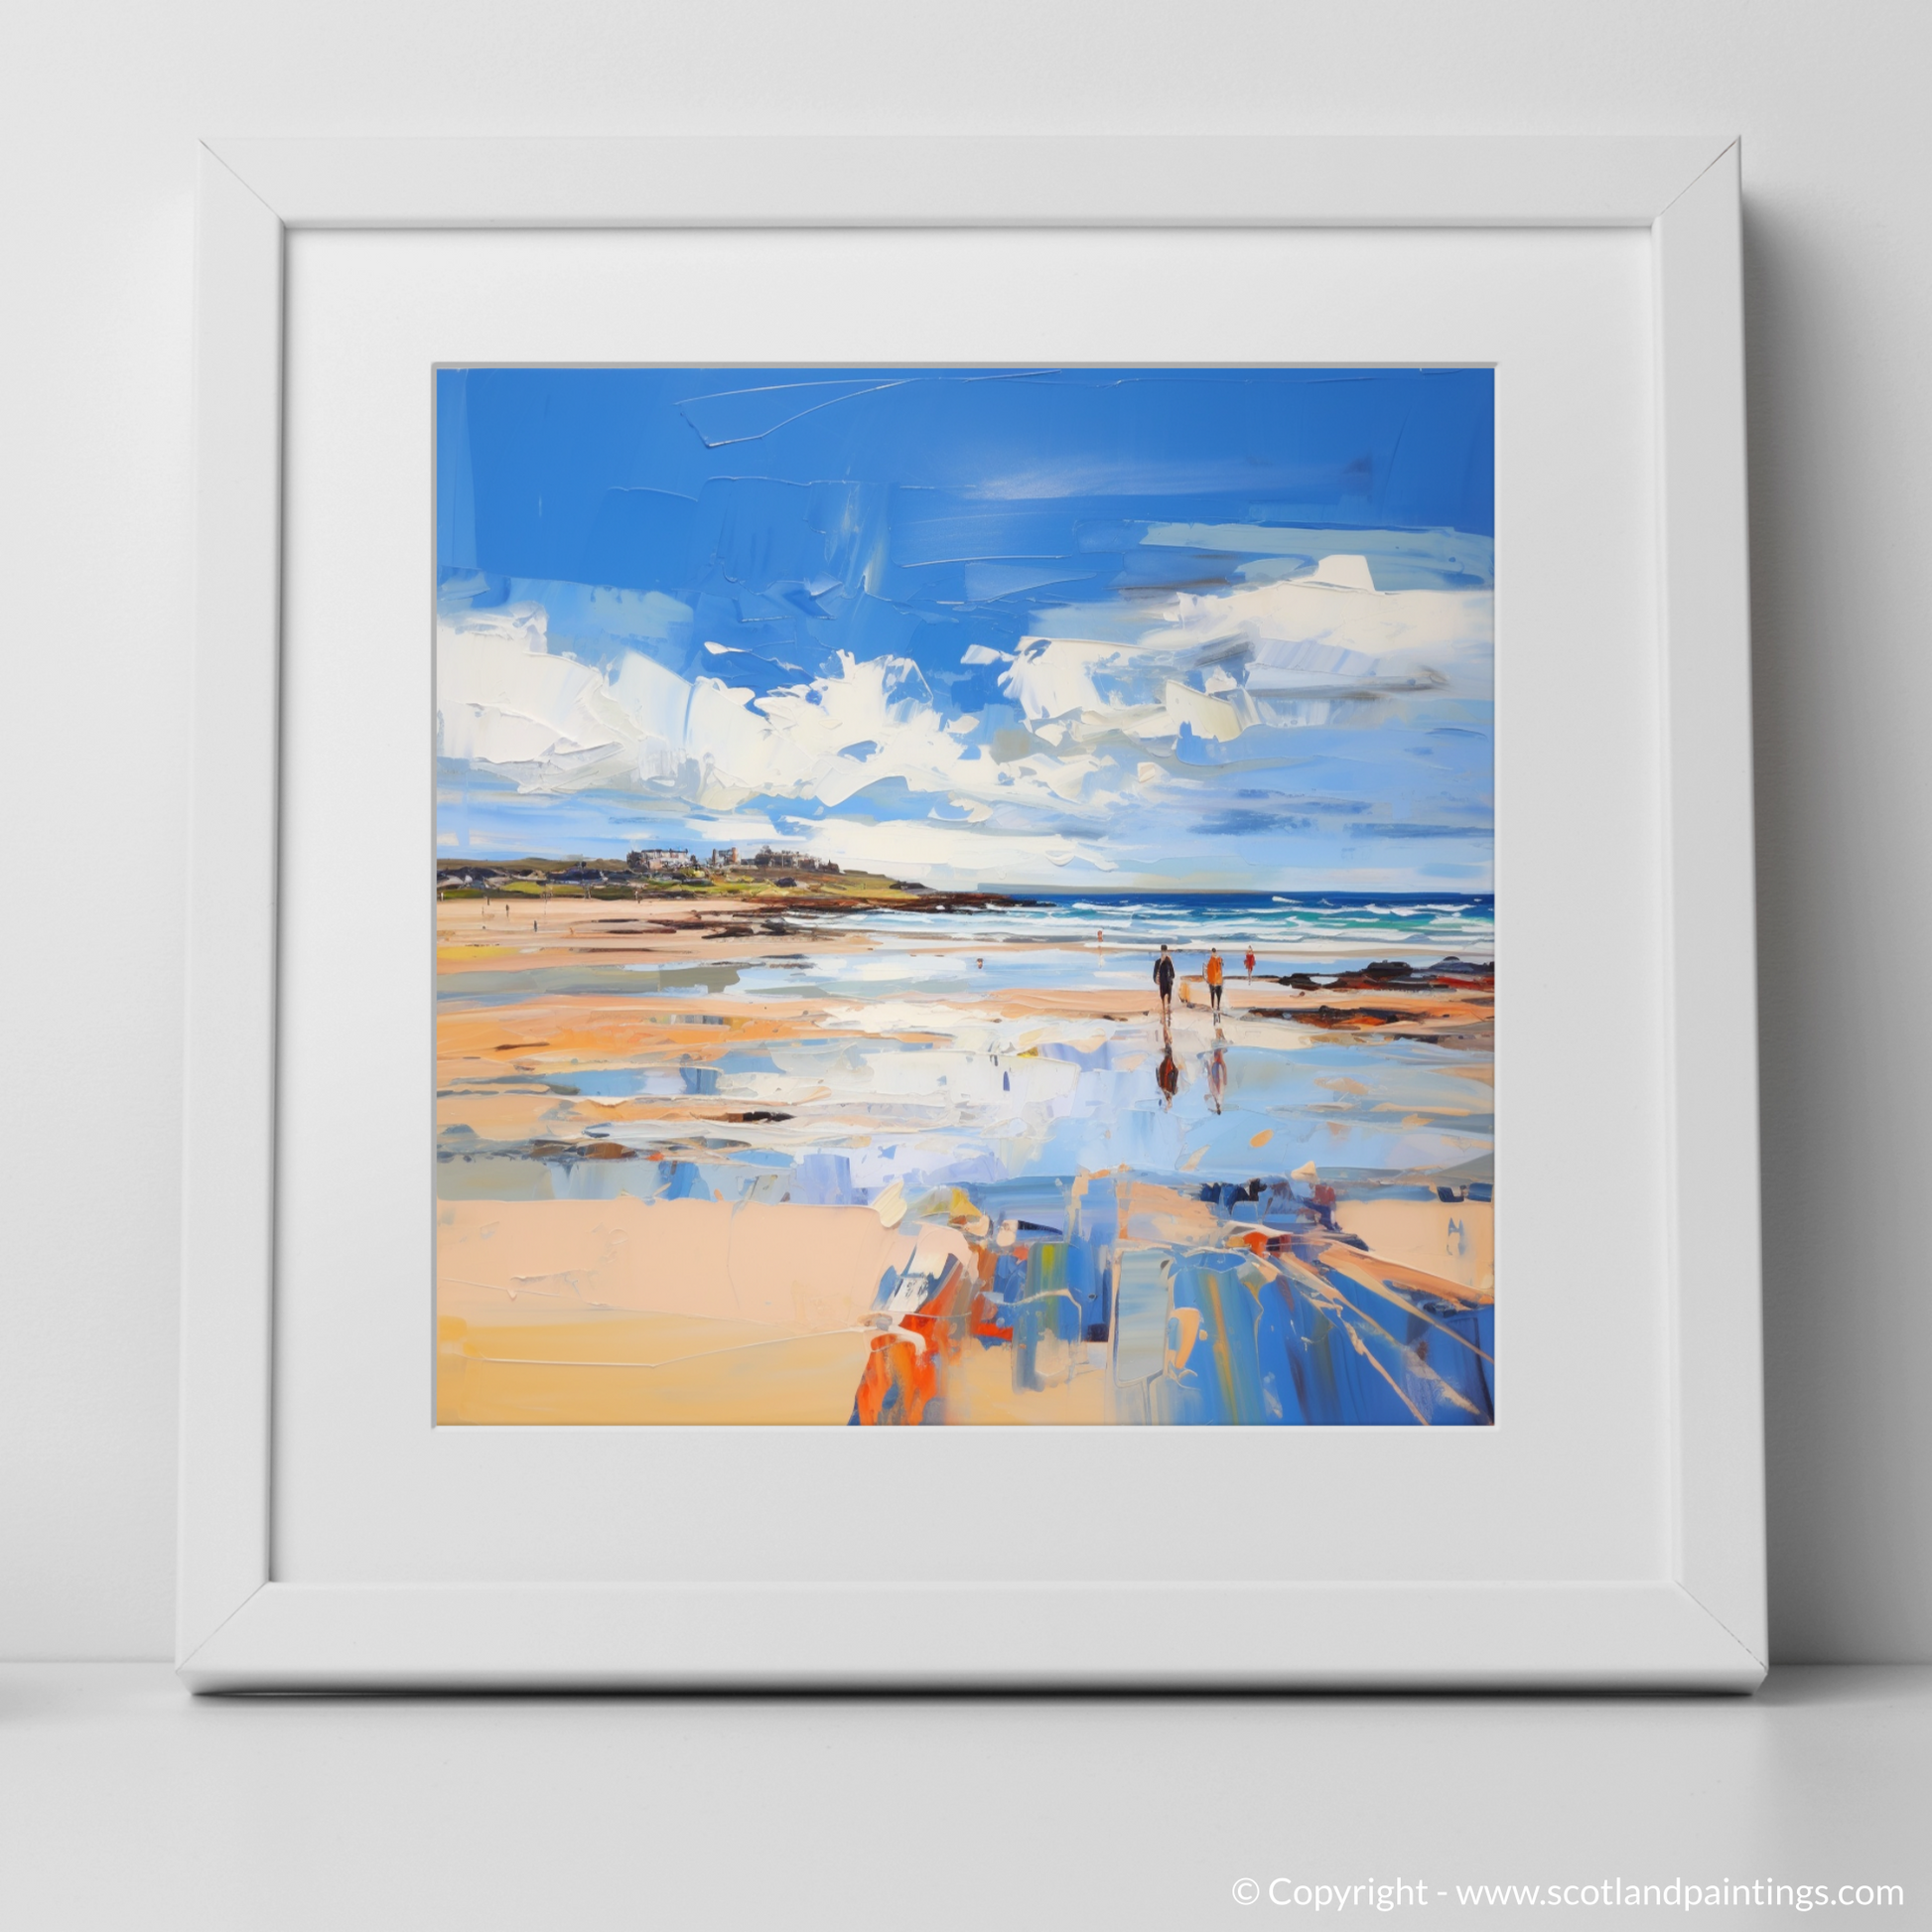 Art Print of West Sands, St Andrews with a white frame